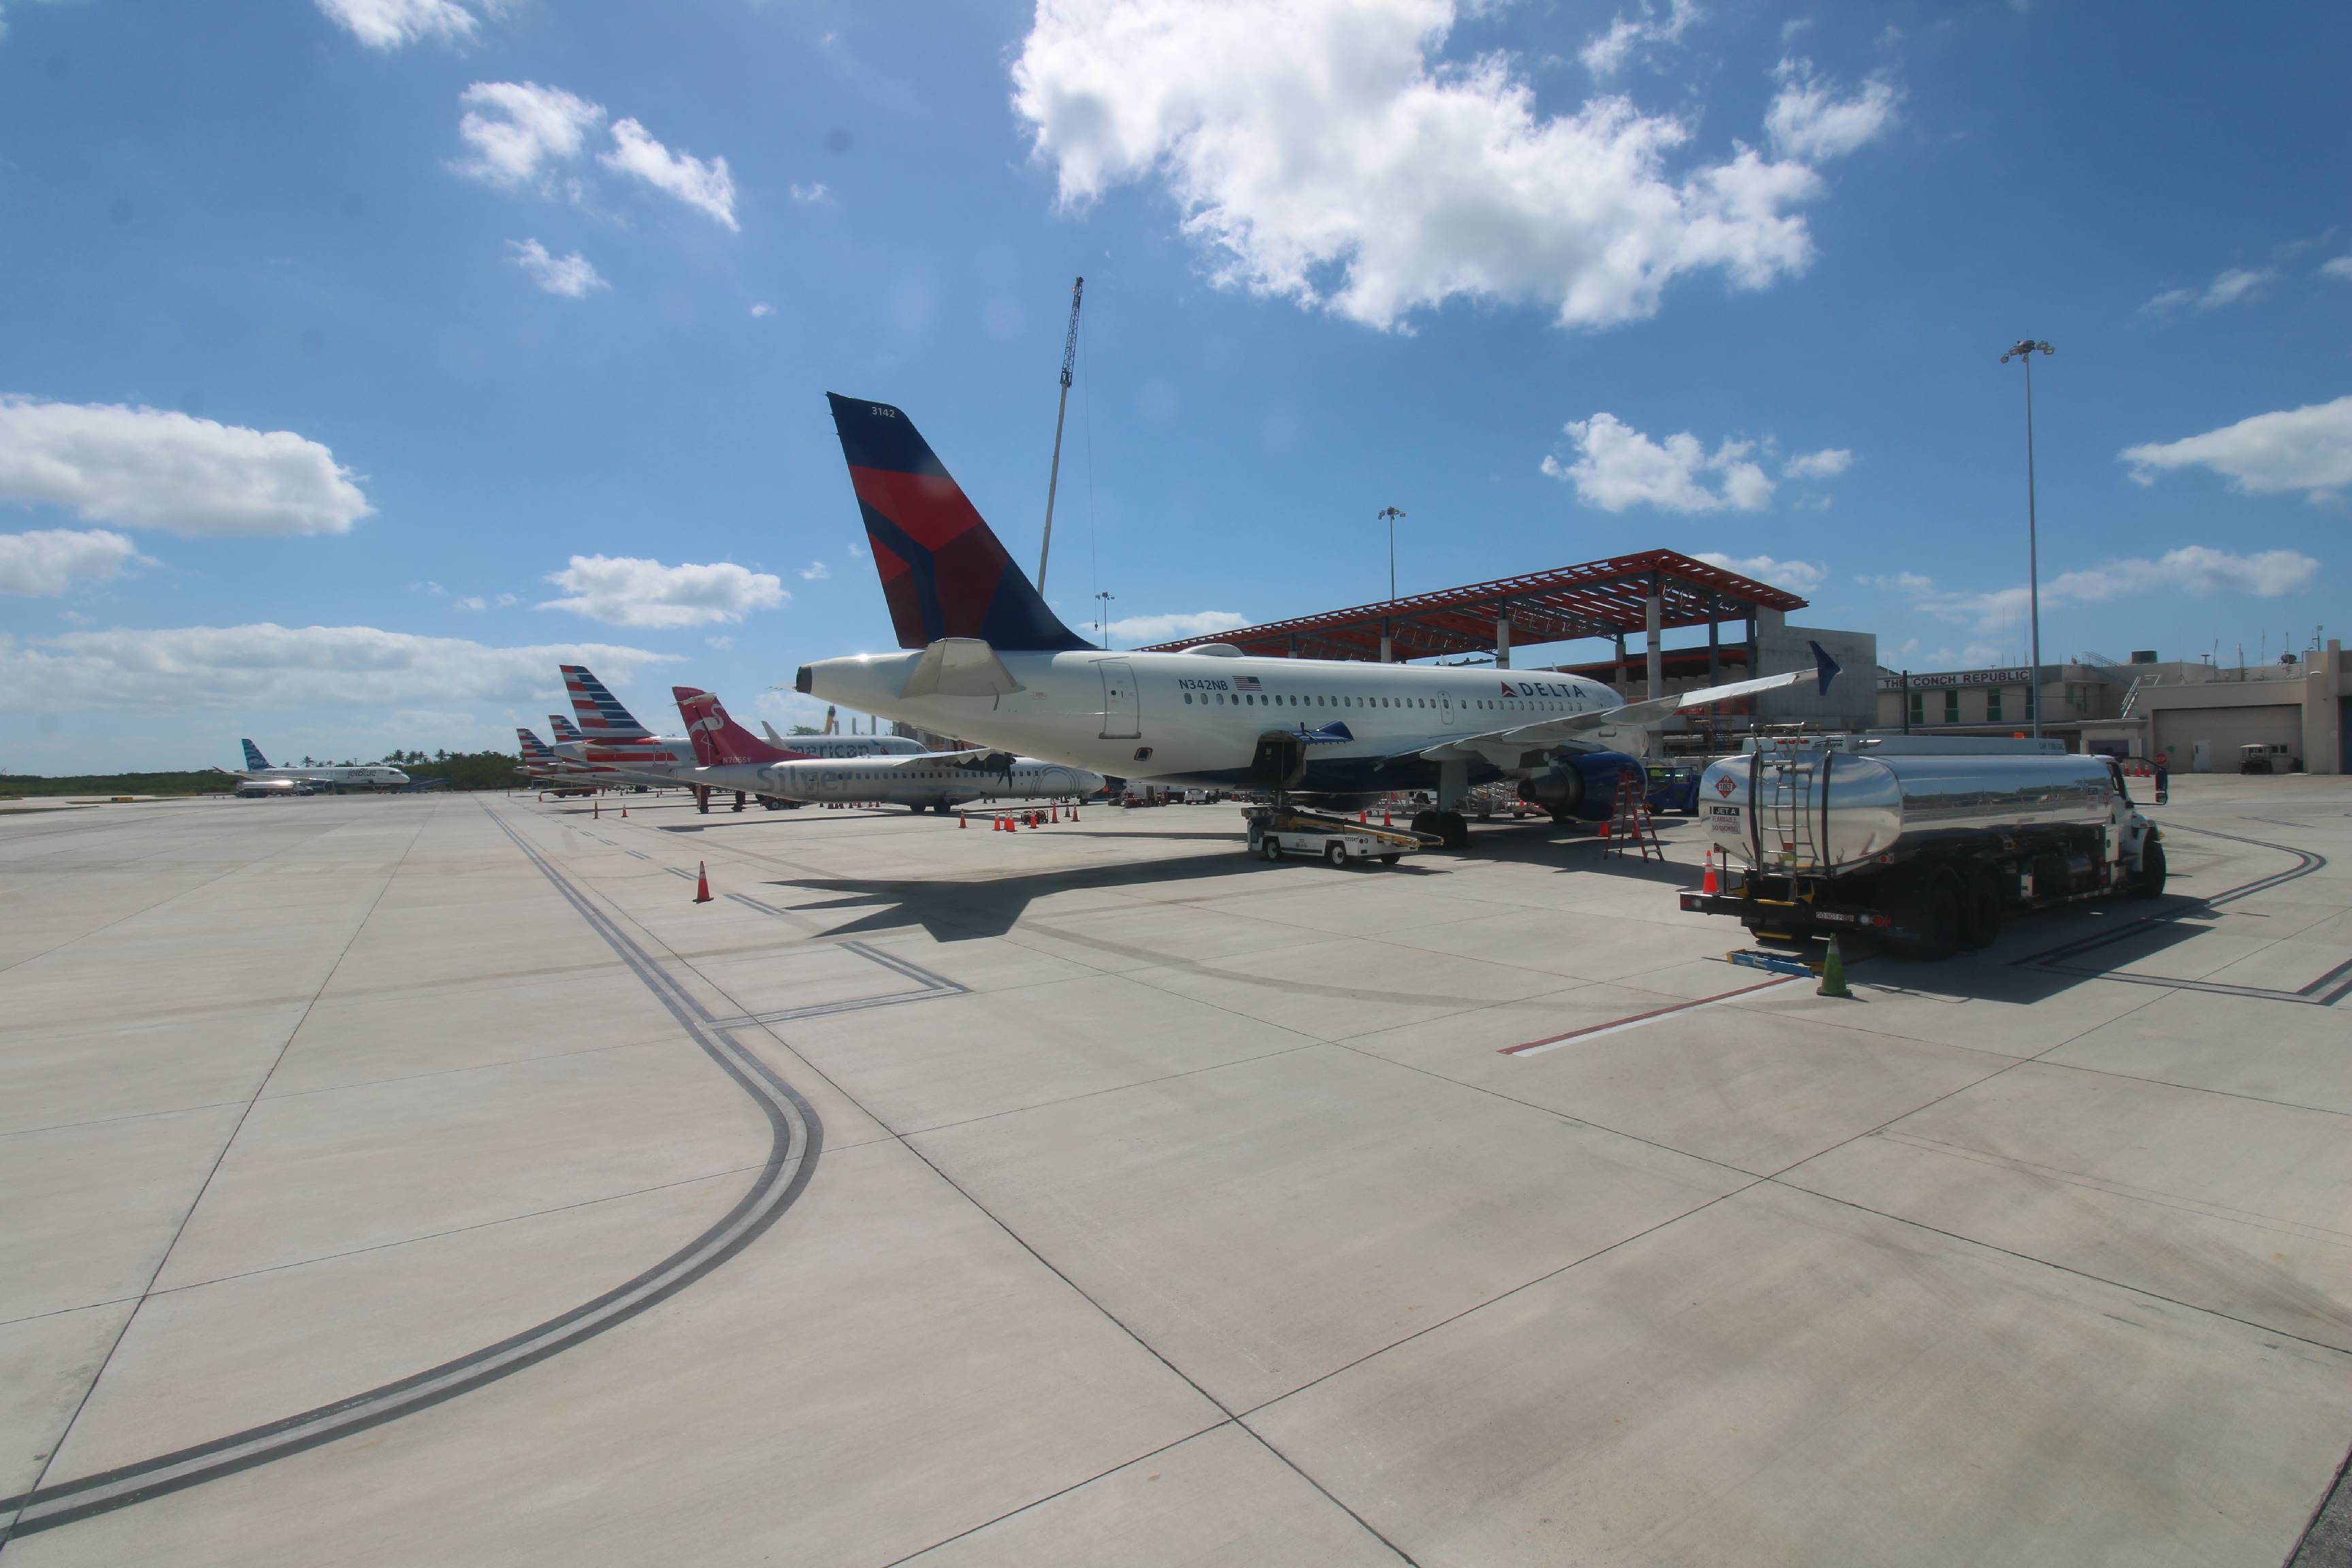 Airplanes lined up at aiport gates